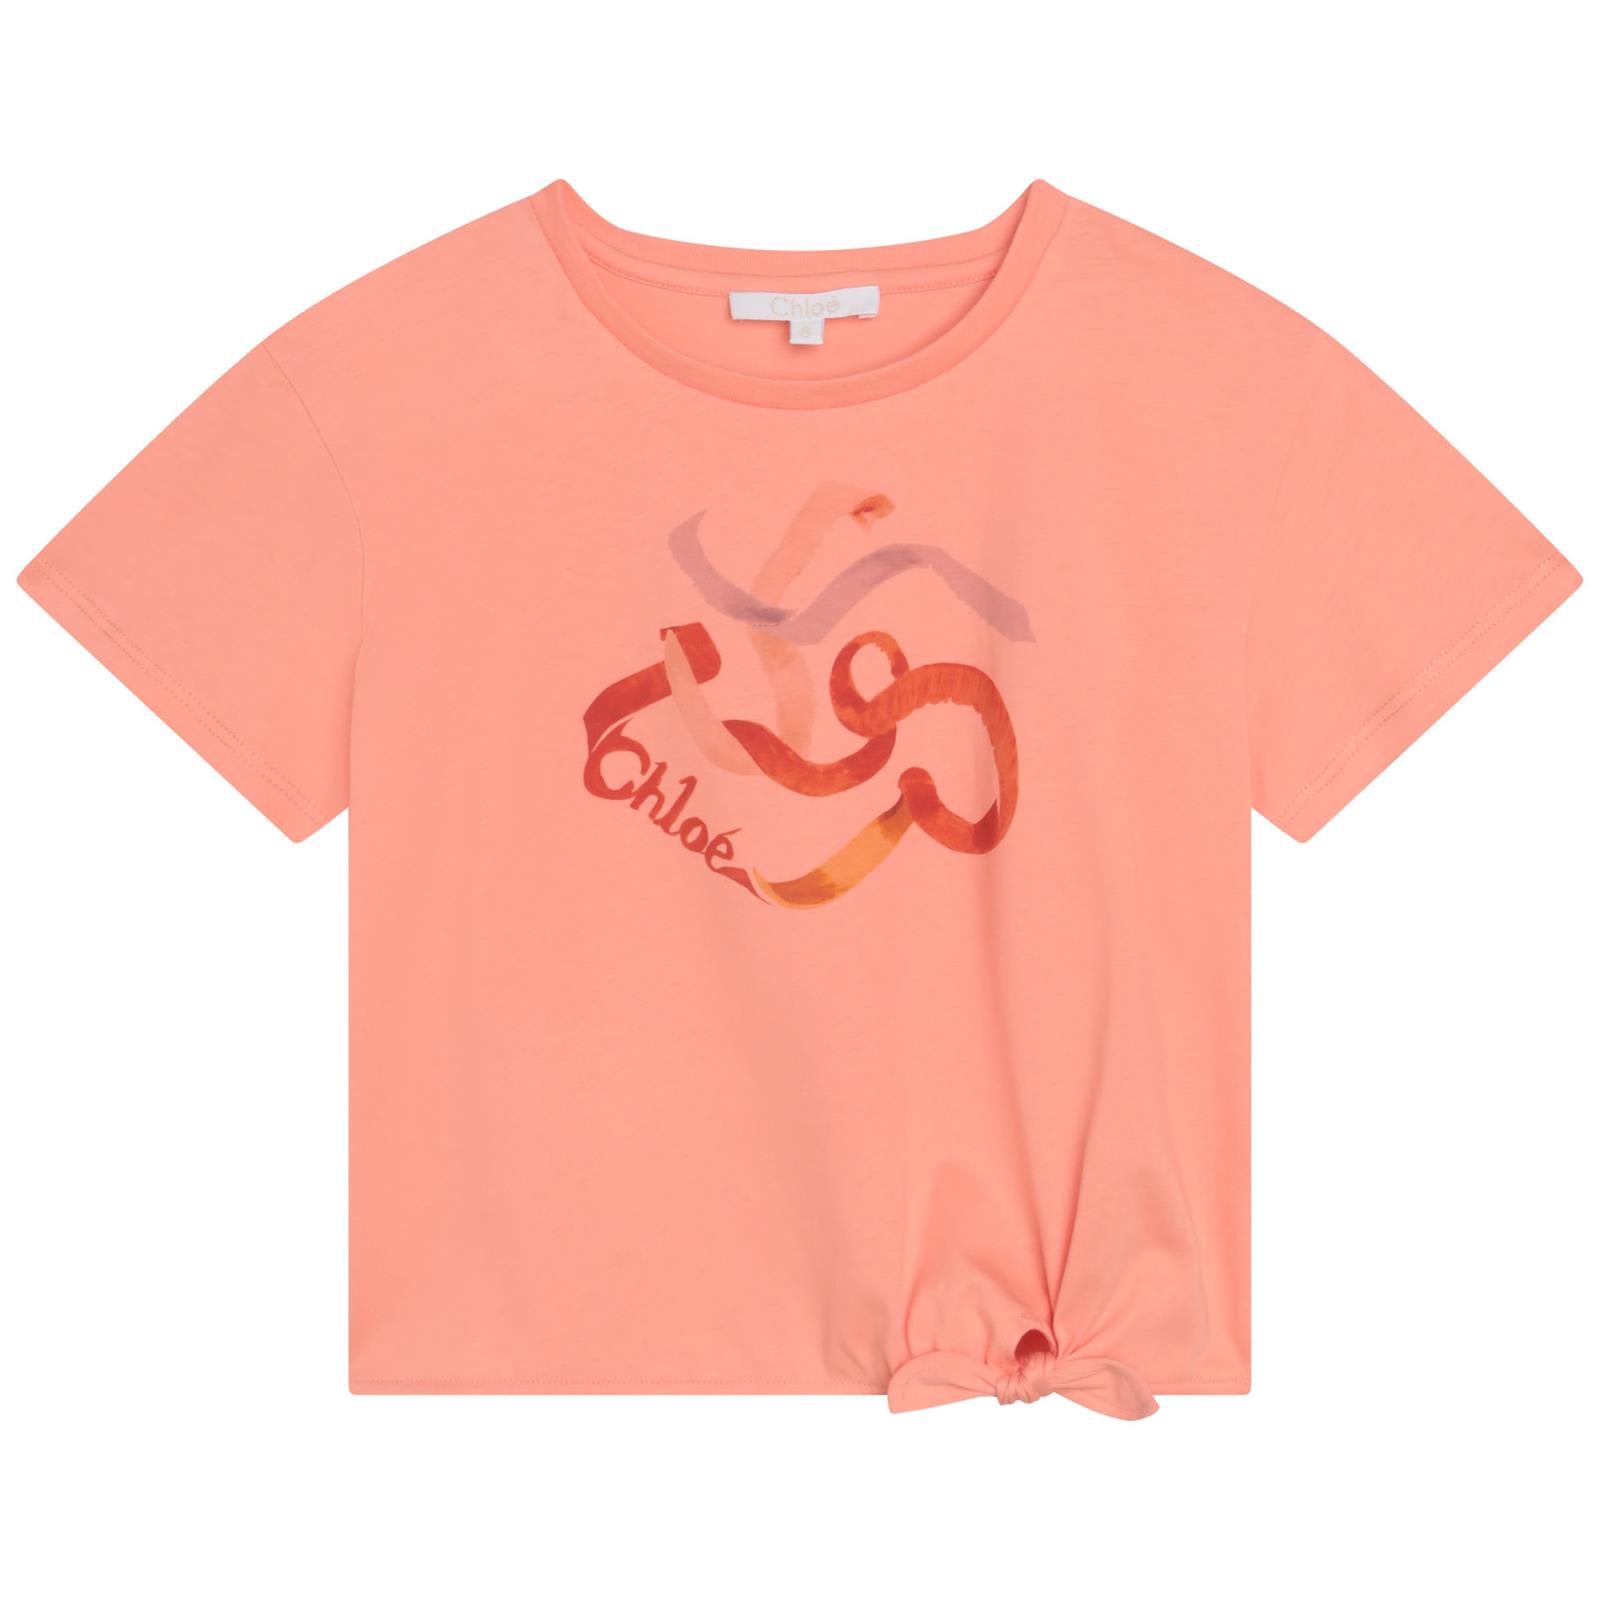 CHLOÉ T-SHIRT WITH GRAPHIC PRINT